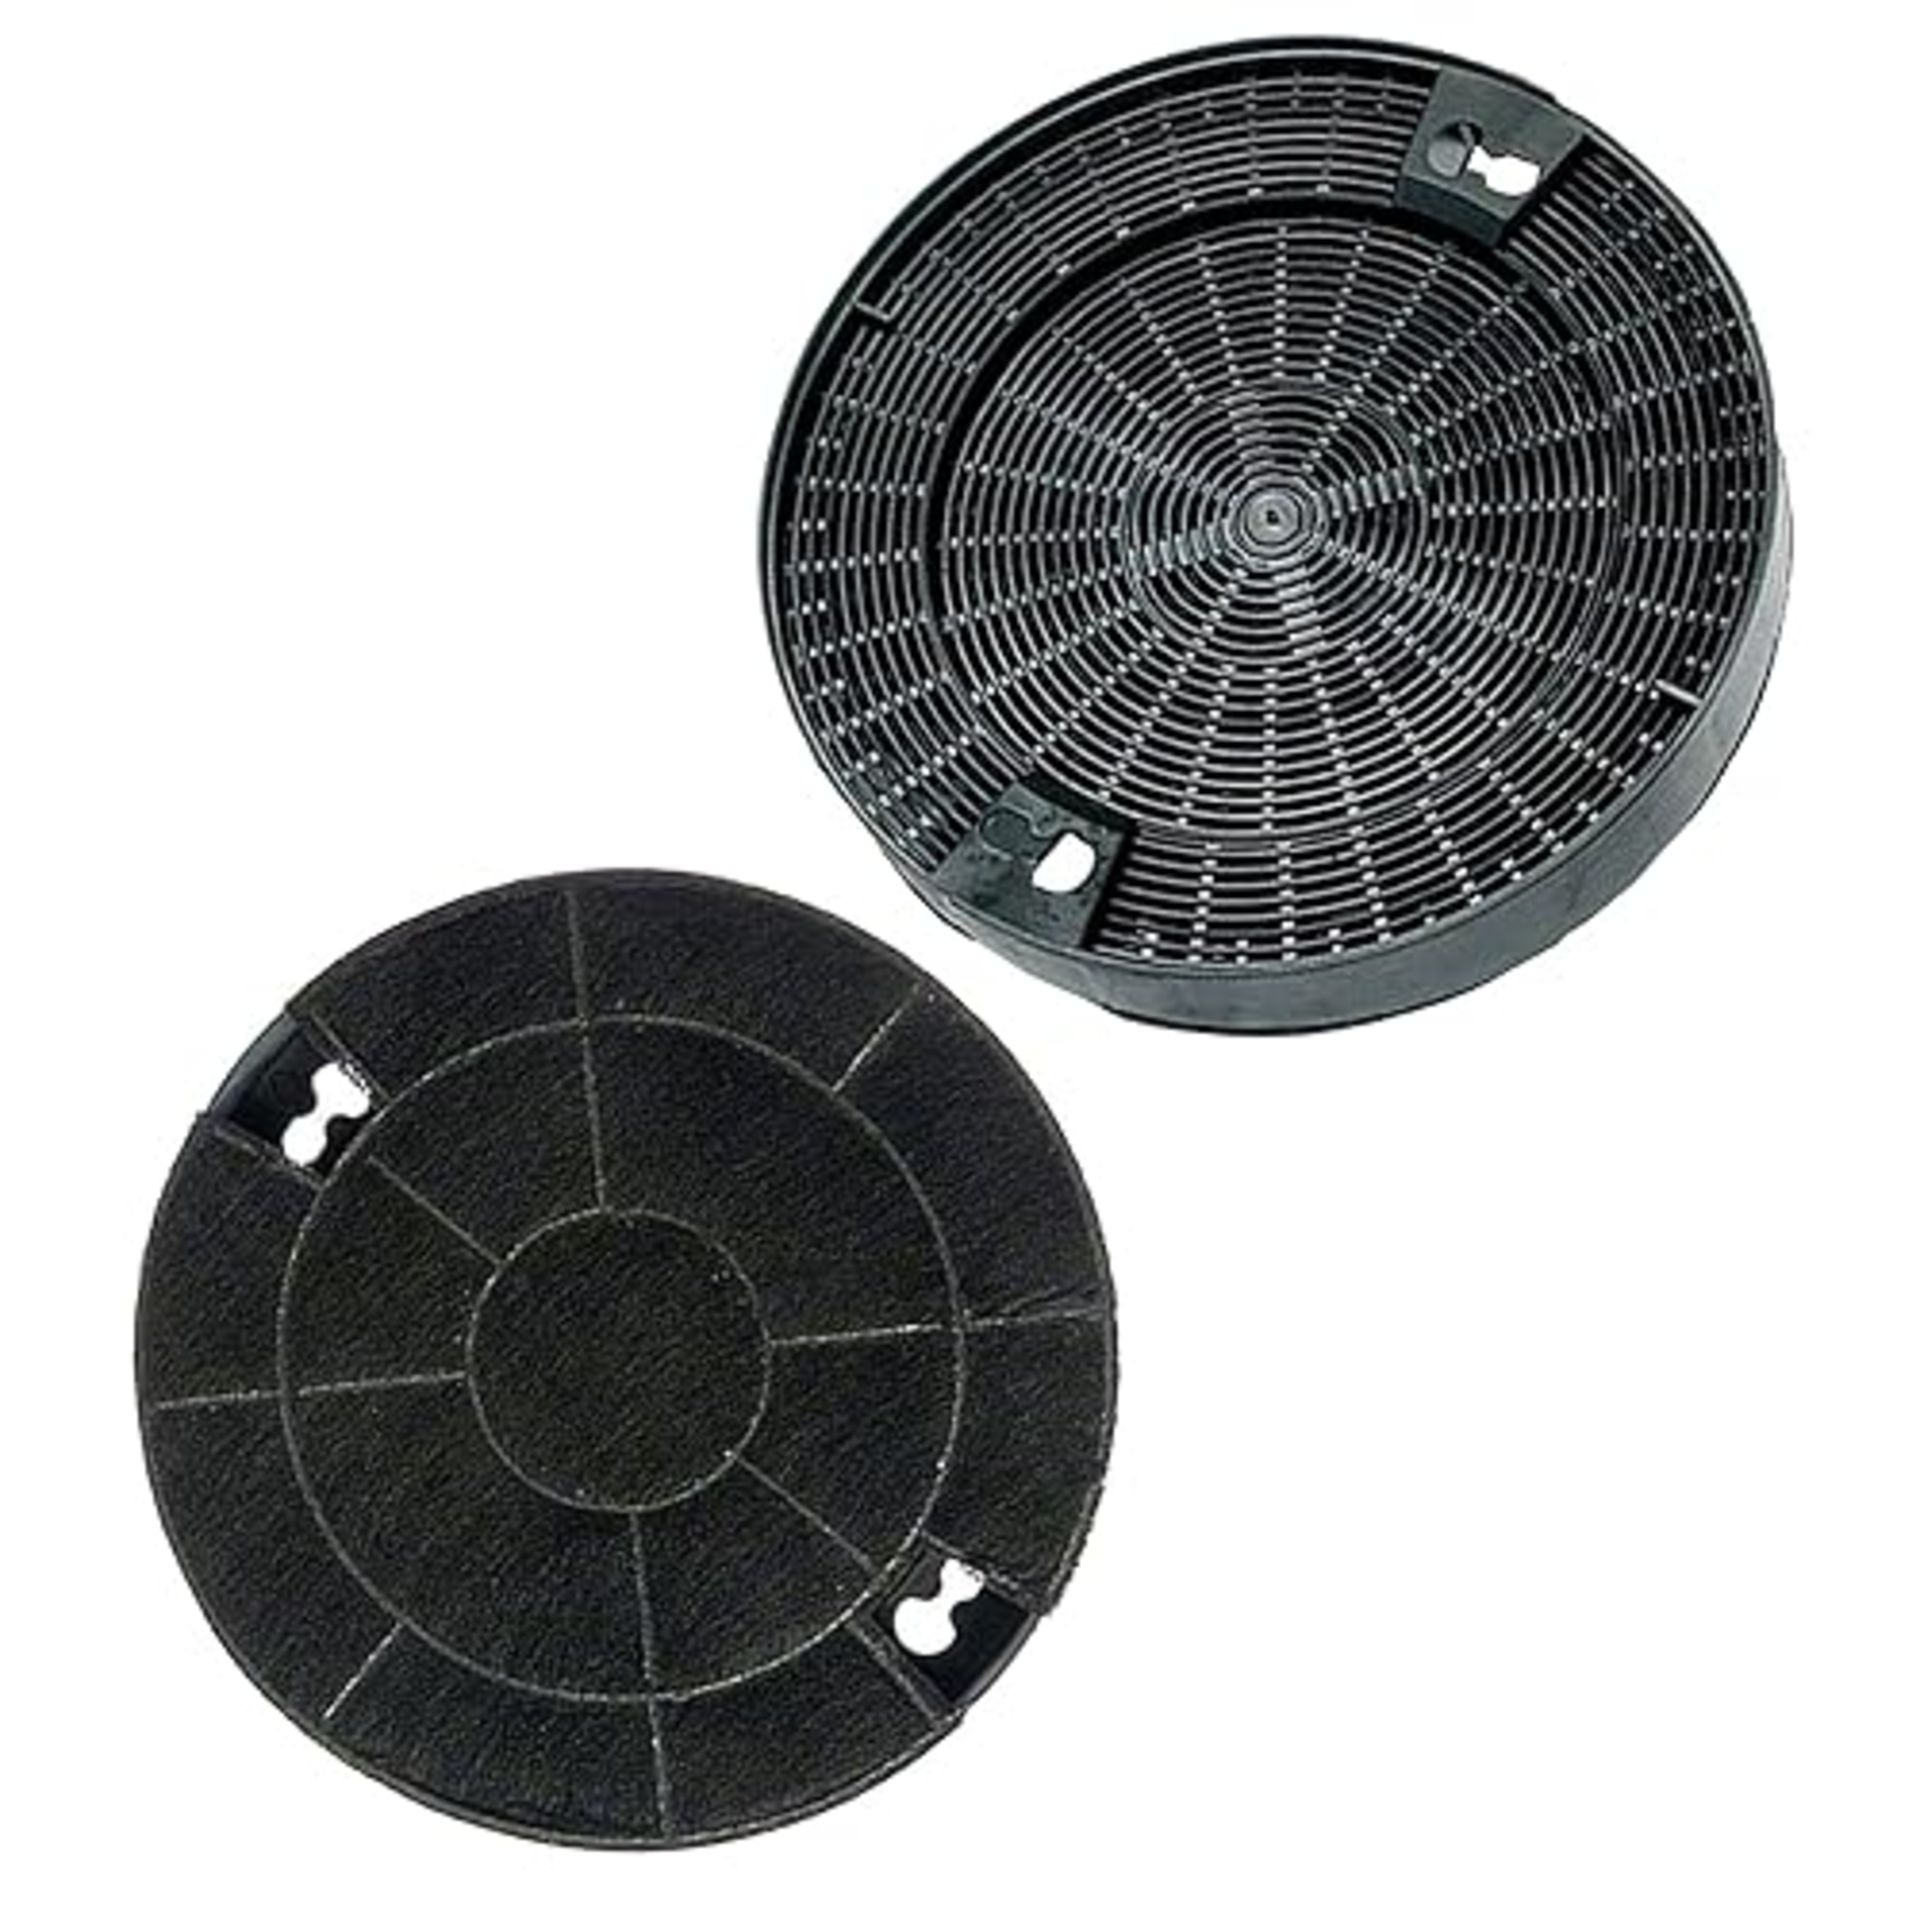 SPARES2GO Type 29 Charcoal Carbon Vent Filter compatible with Electrolux Cooker Hood (190 mm x 35 m